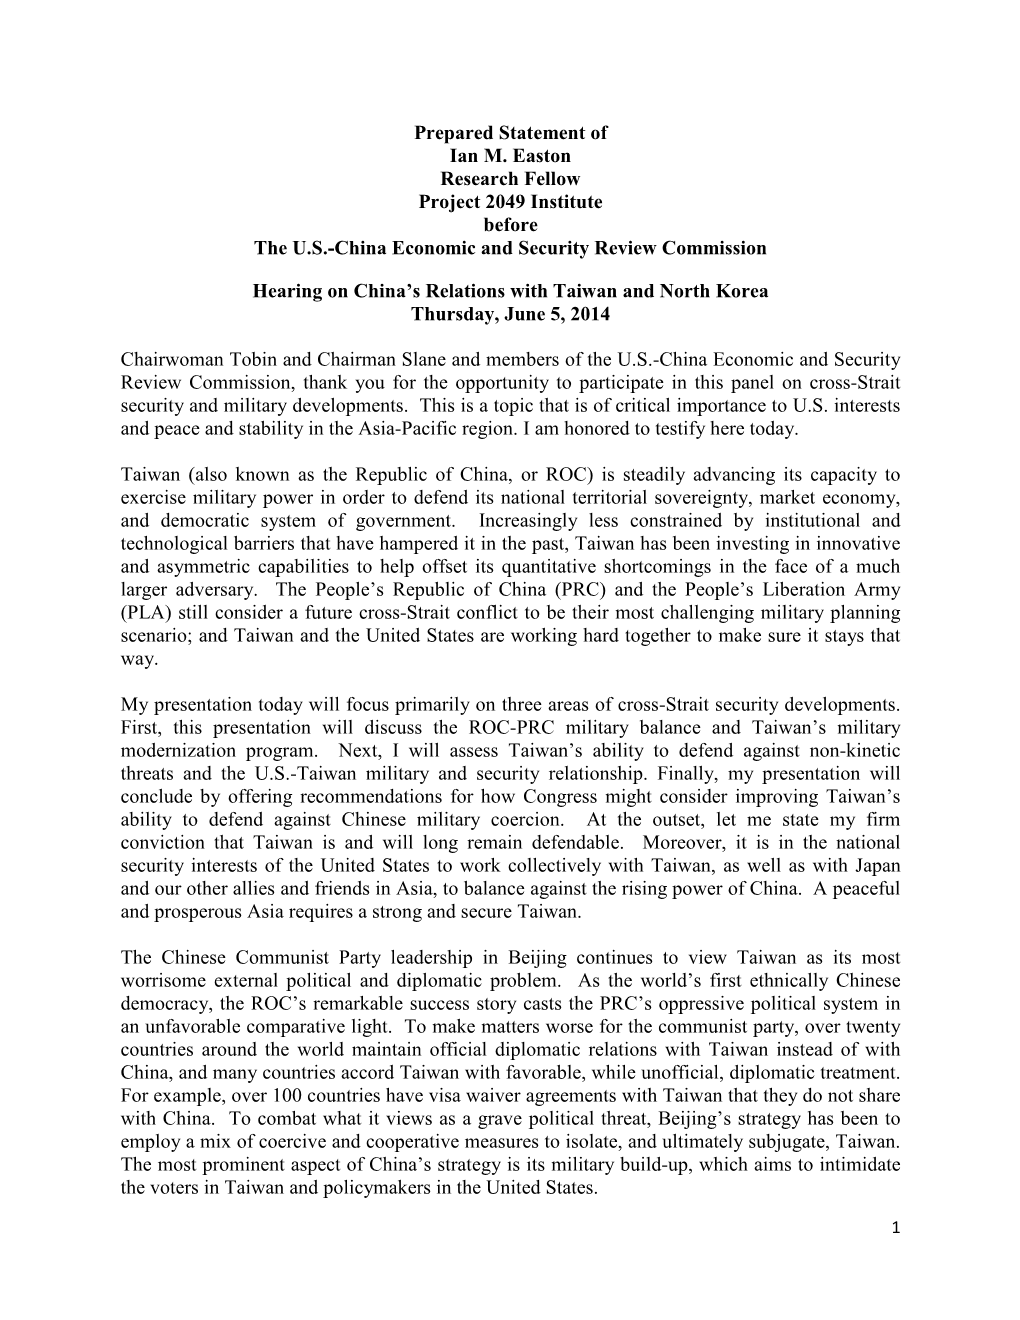 Prepared Statement of Ian M. Easton Research Fellow Project 2049 Institute Before the U.S.-China Economic and Security Review Commission